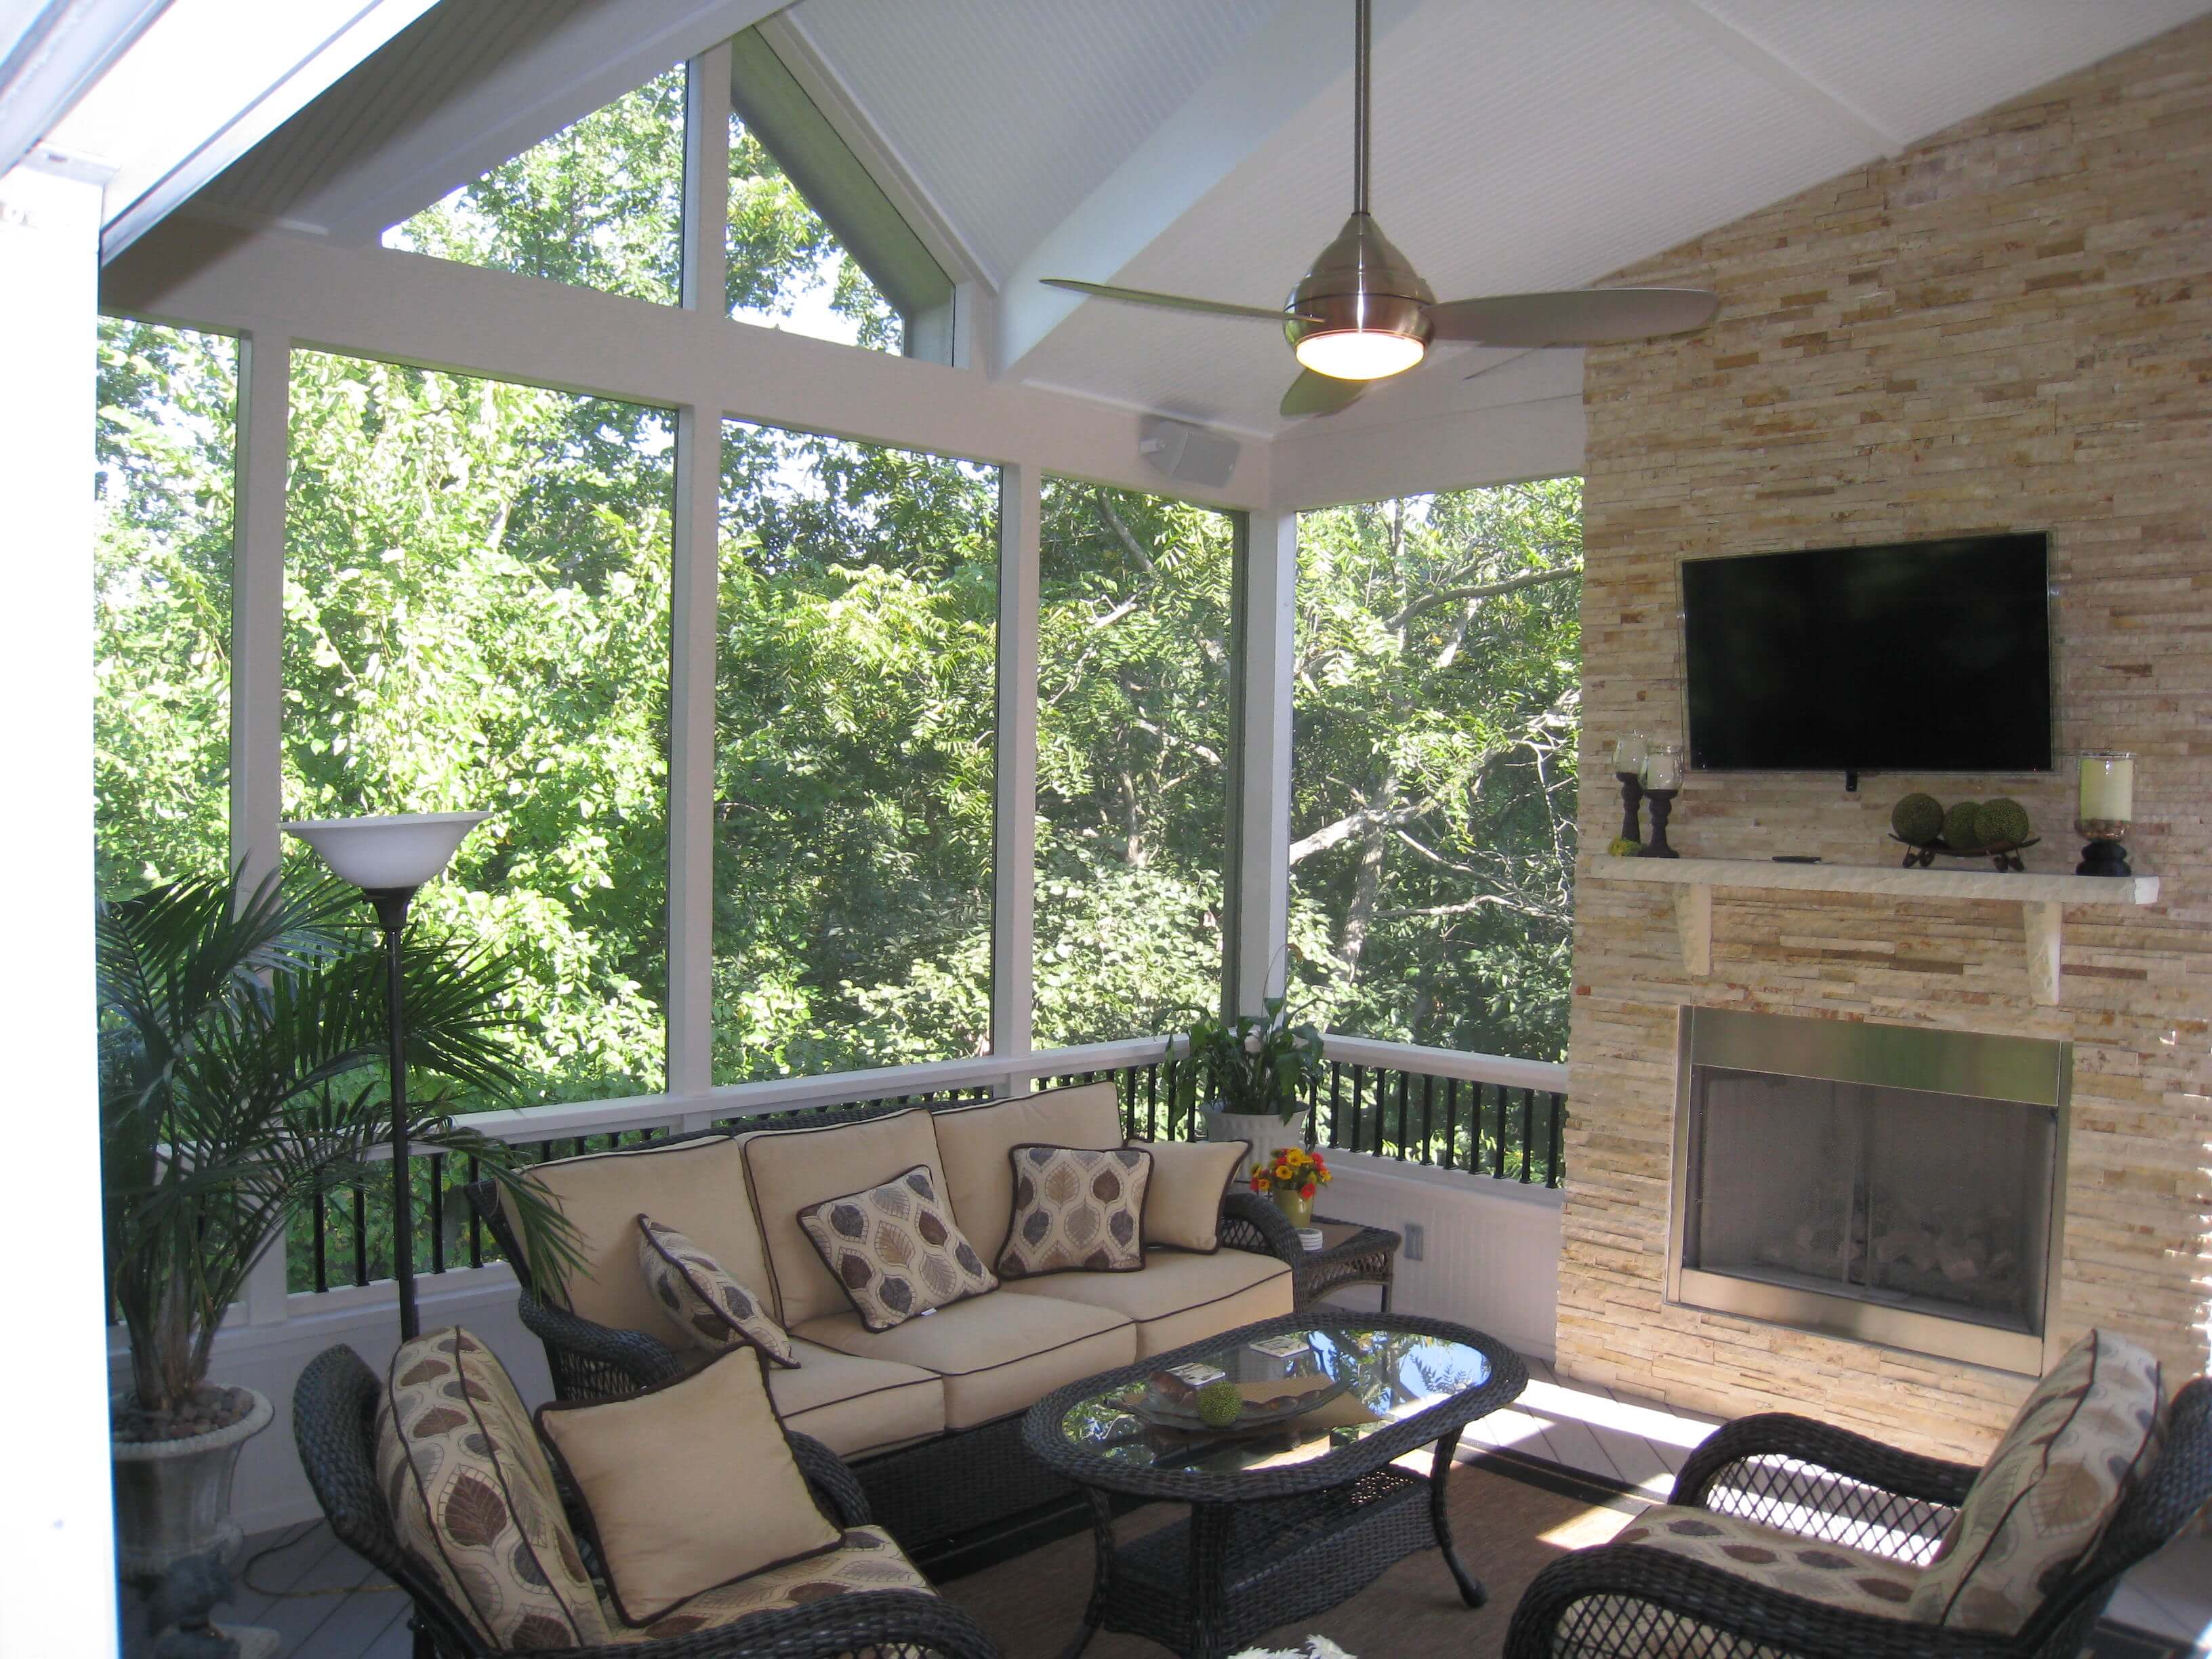 Custom screened porch with fireplace